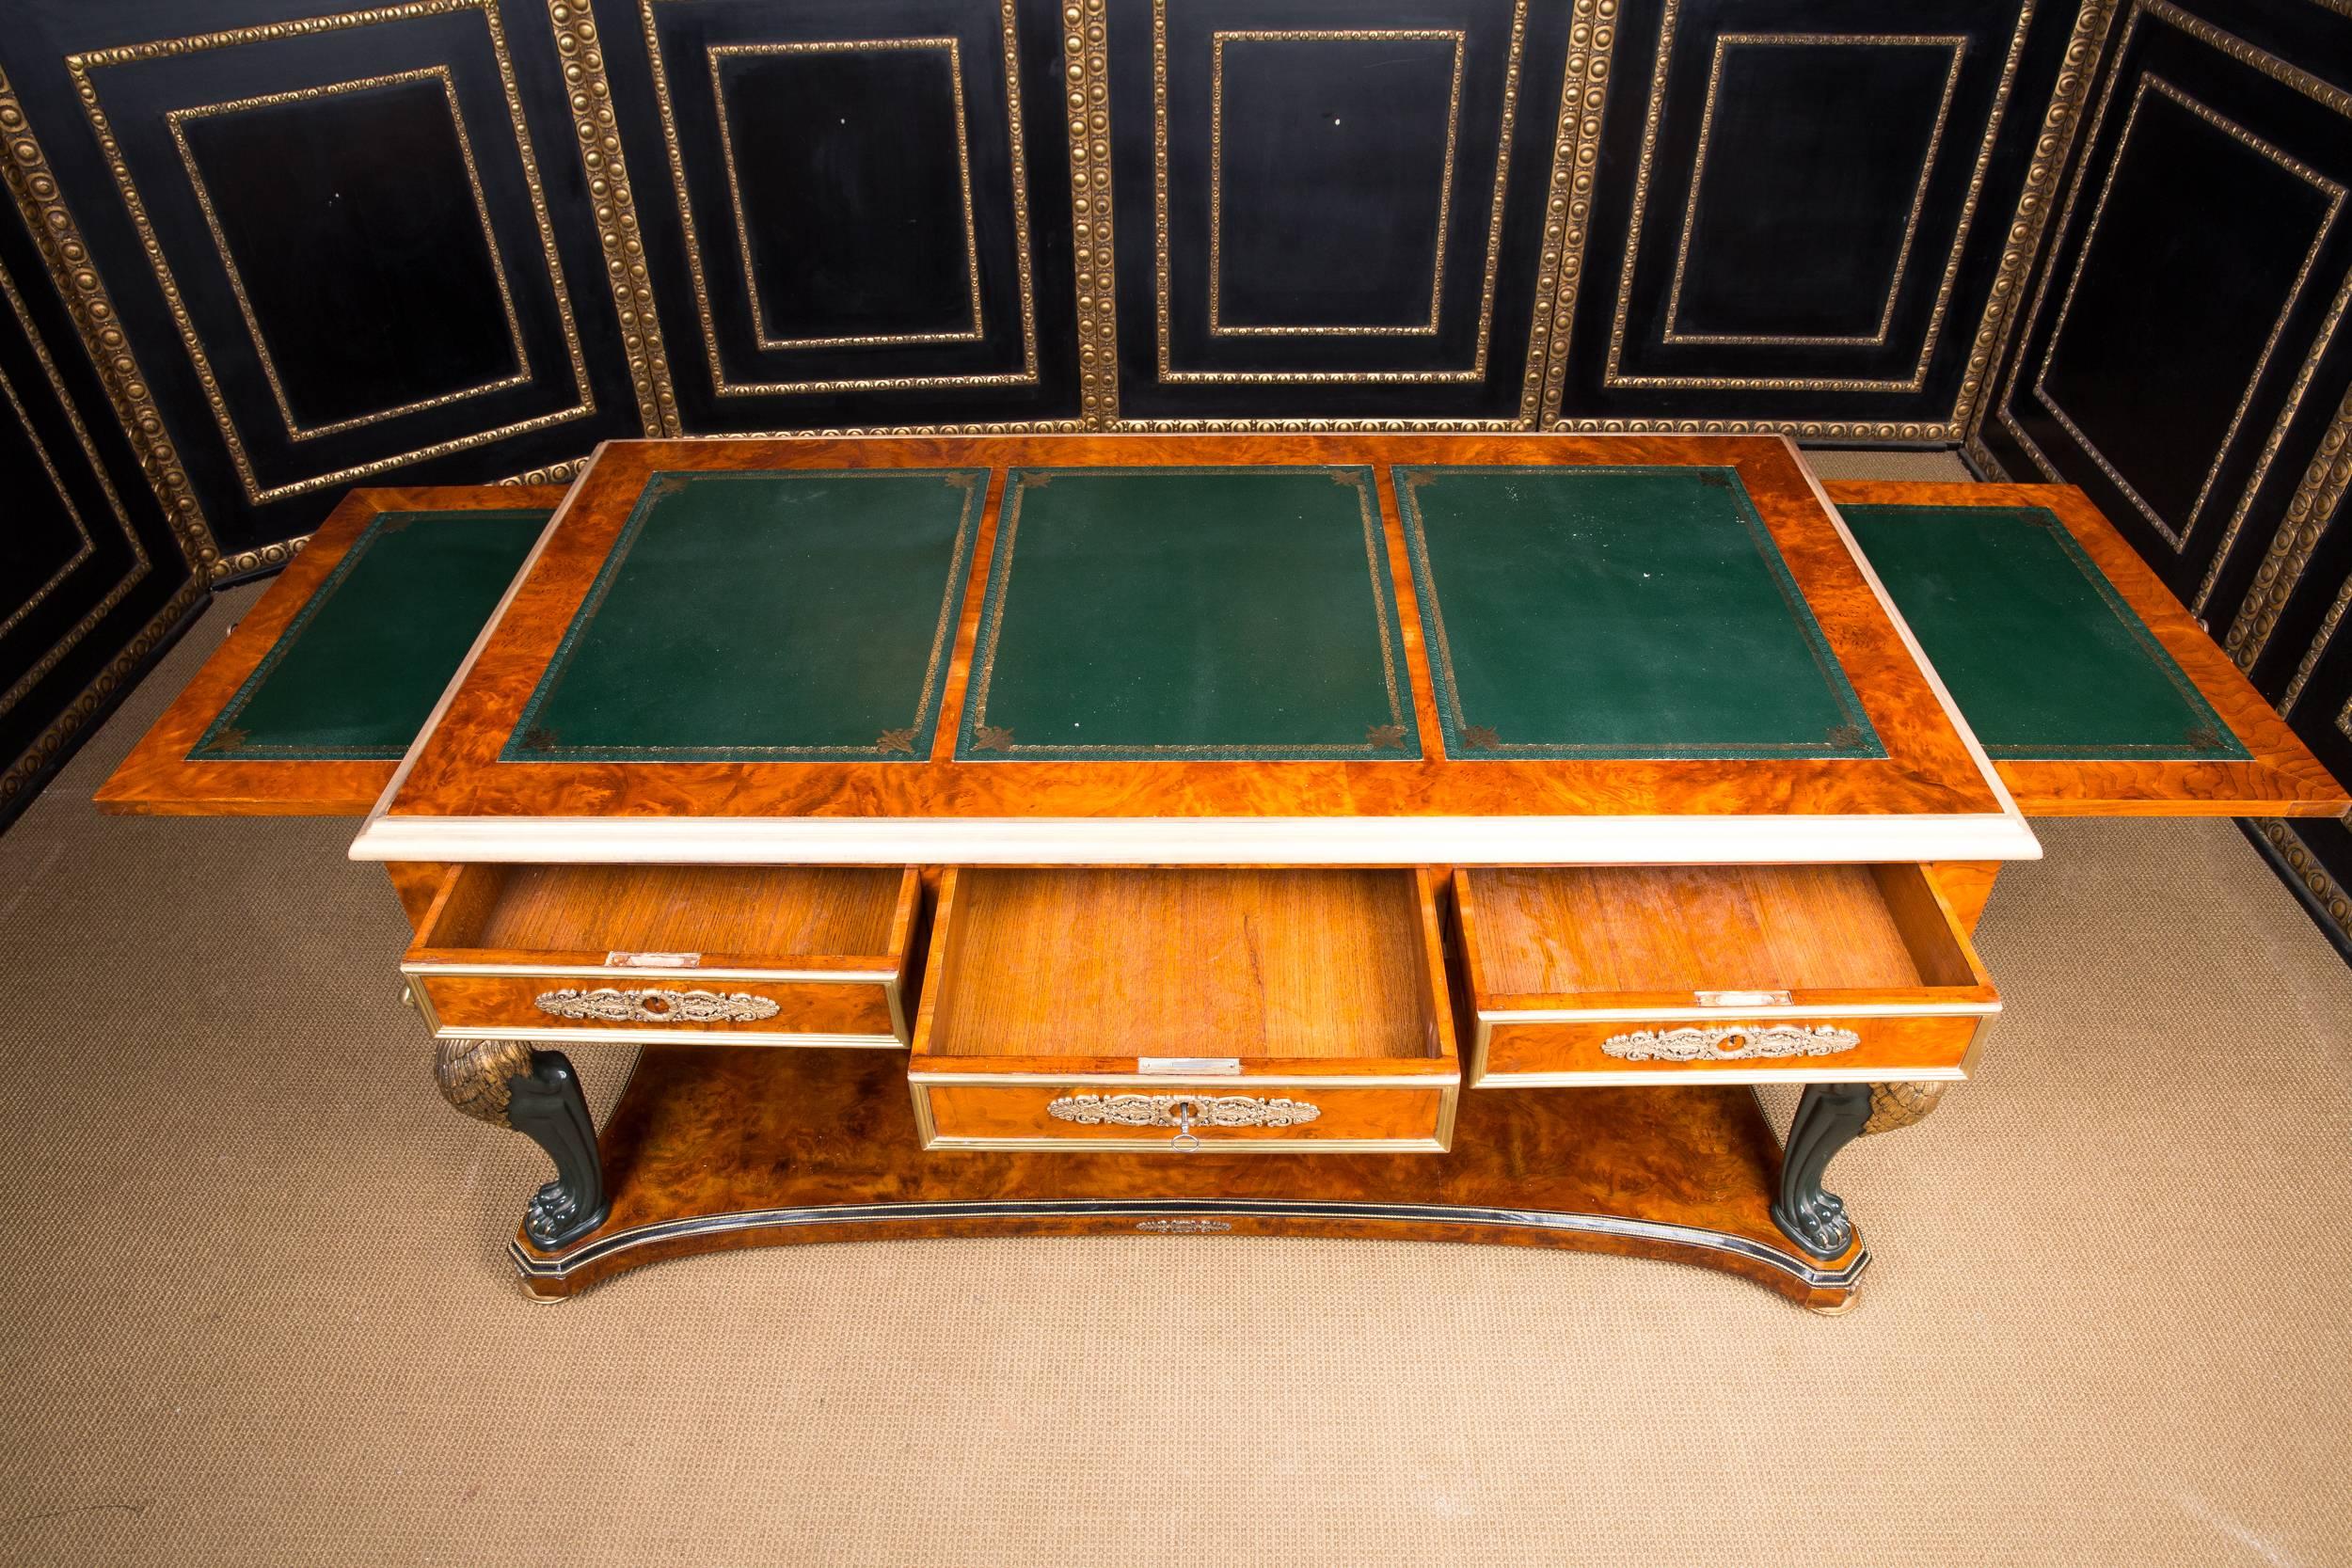 20th Century, French Desk or Bureau Plat with Lions in the antique Empire Style 3